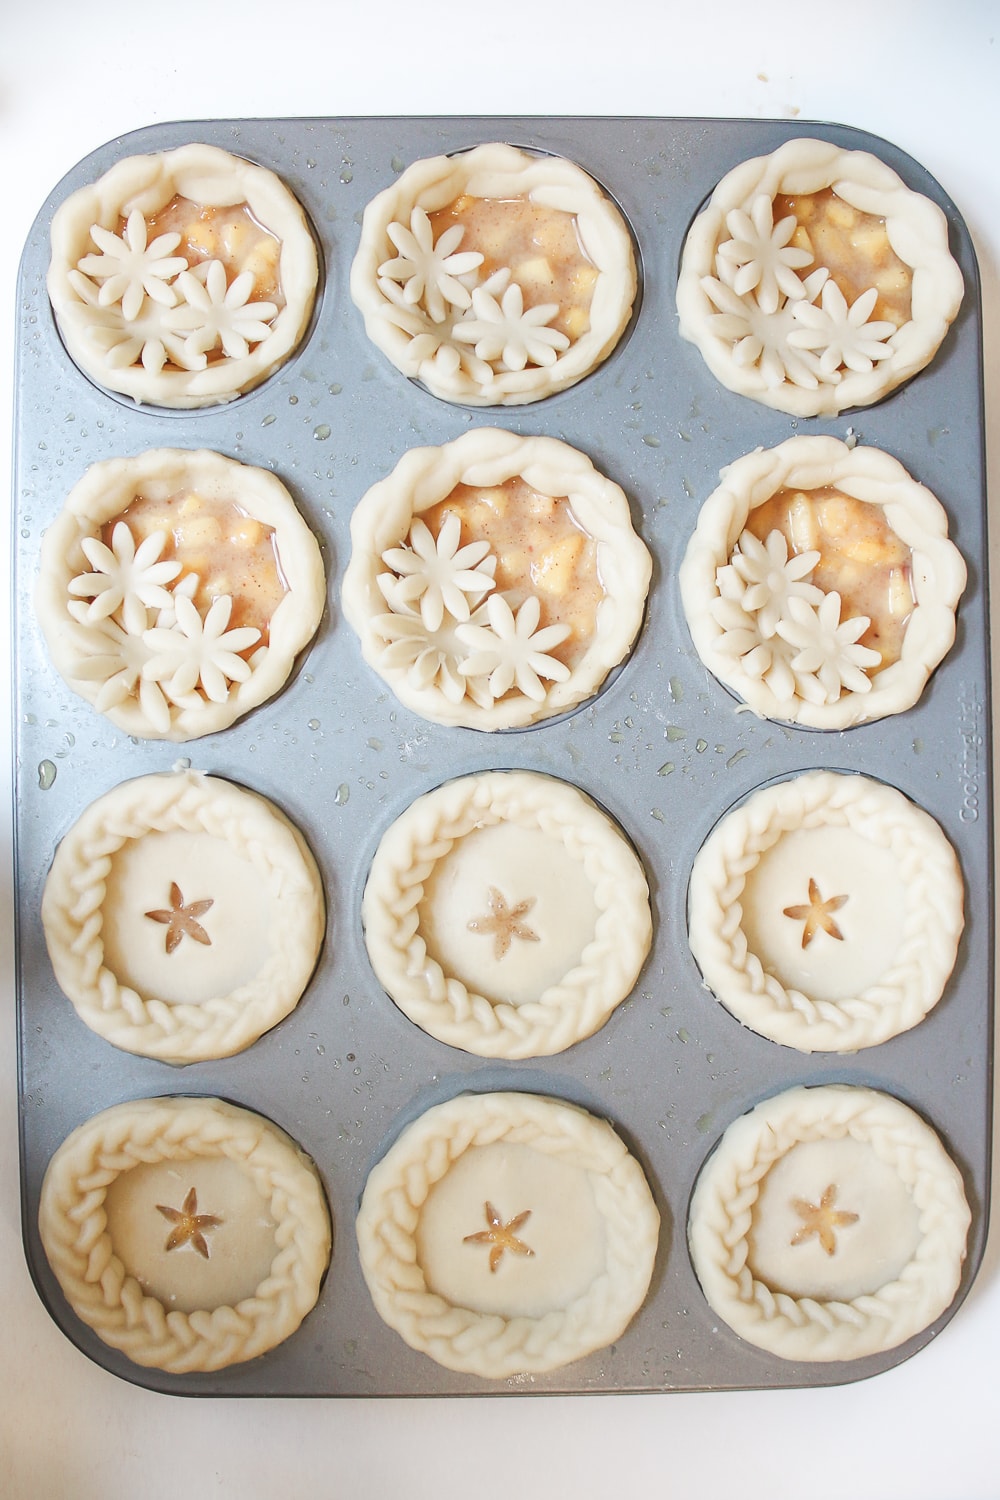 Southern lifestyle blogger Stephanie Ziajka shows how to make mini pies in cupcake tin on Diary of a Debutante